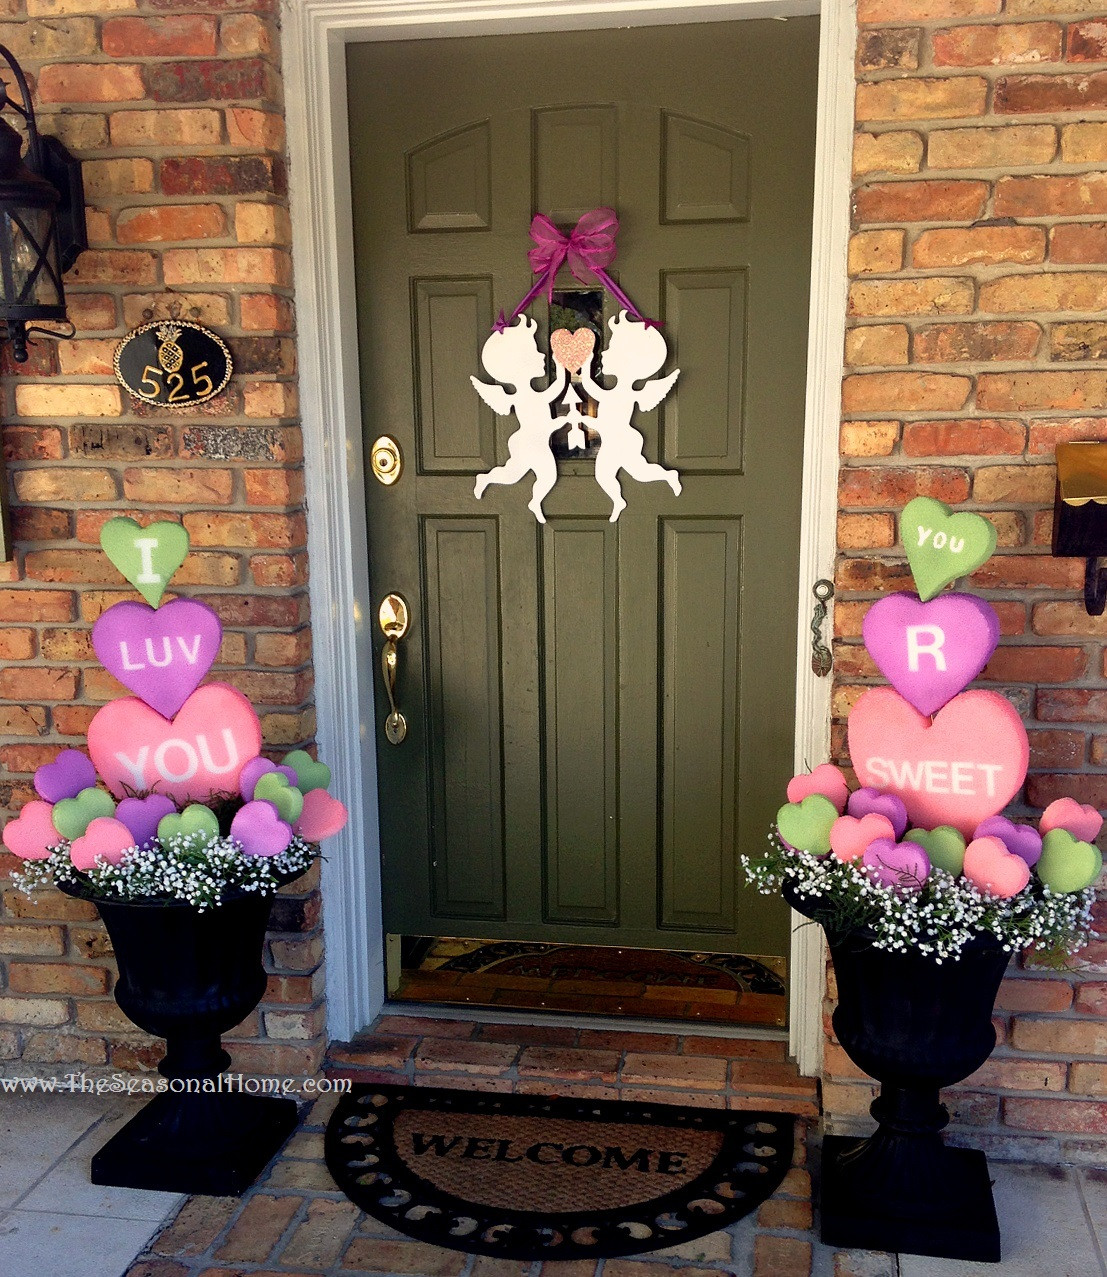 Valentines Day Decor Ideas
 My Re purposed Valentine’s Day The Seasonal Home